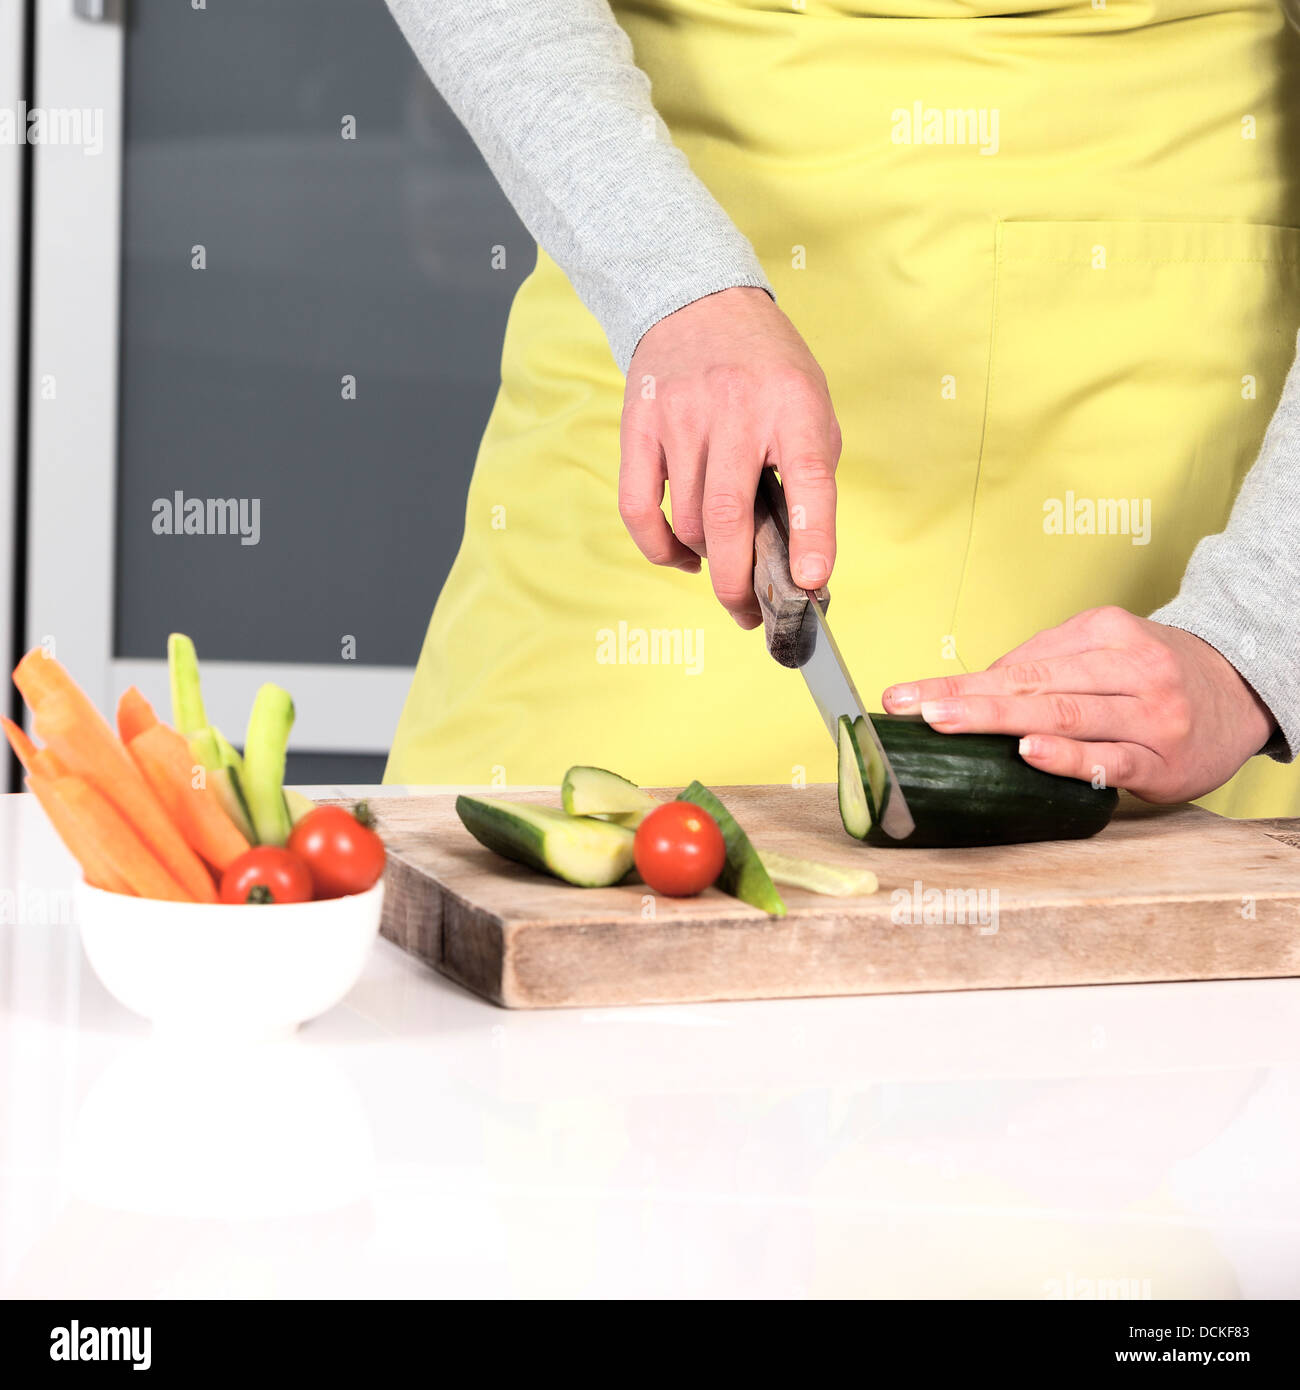 Woman cutting vegetables at home Banque D'Images